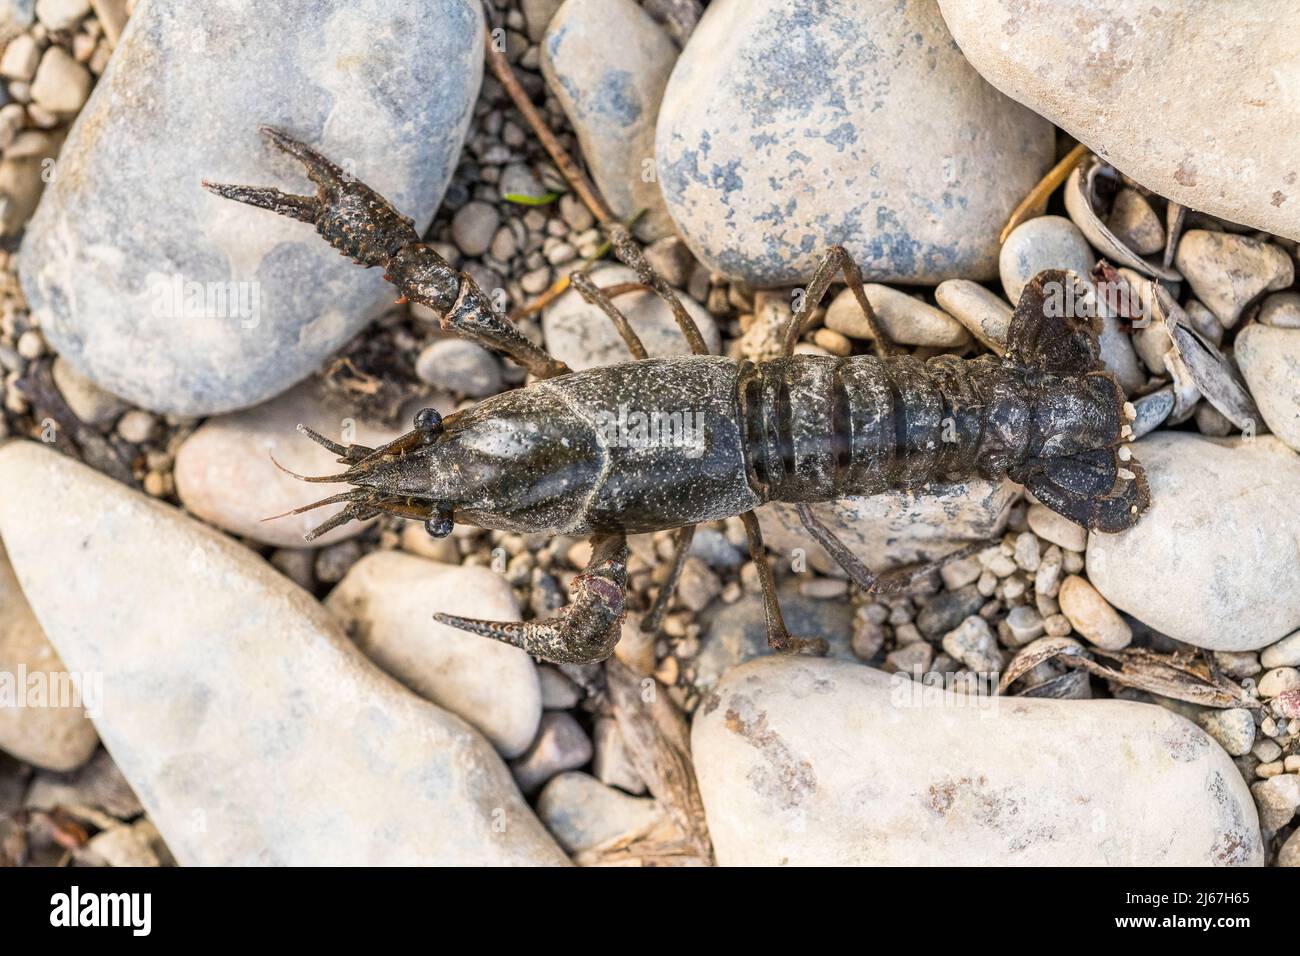 spinycheek crayfish (Faxonius limosus =Orconectes limosus), a species of crayfish in the family Cambaridae. Stock Photo